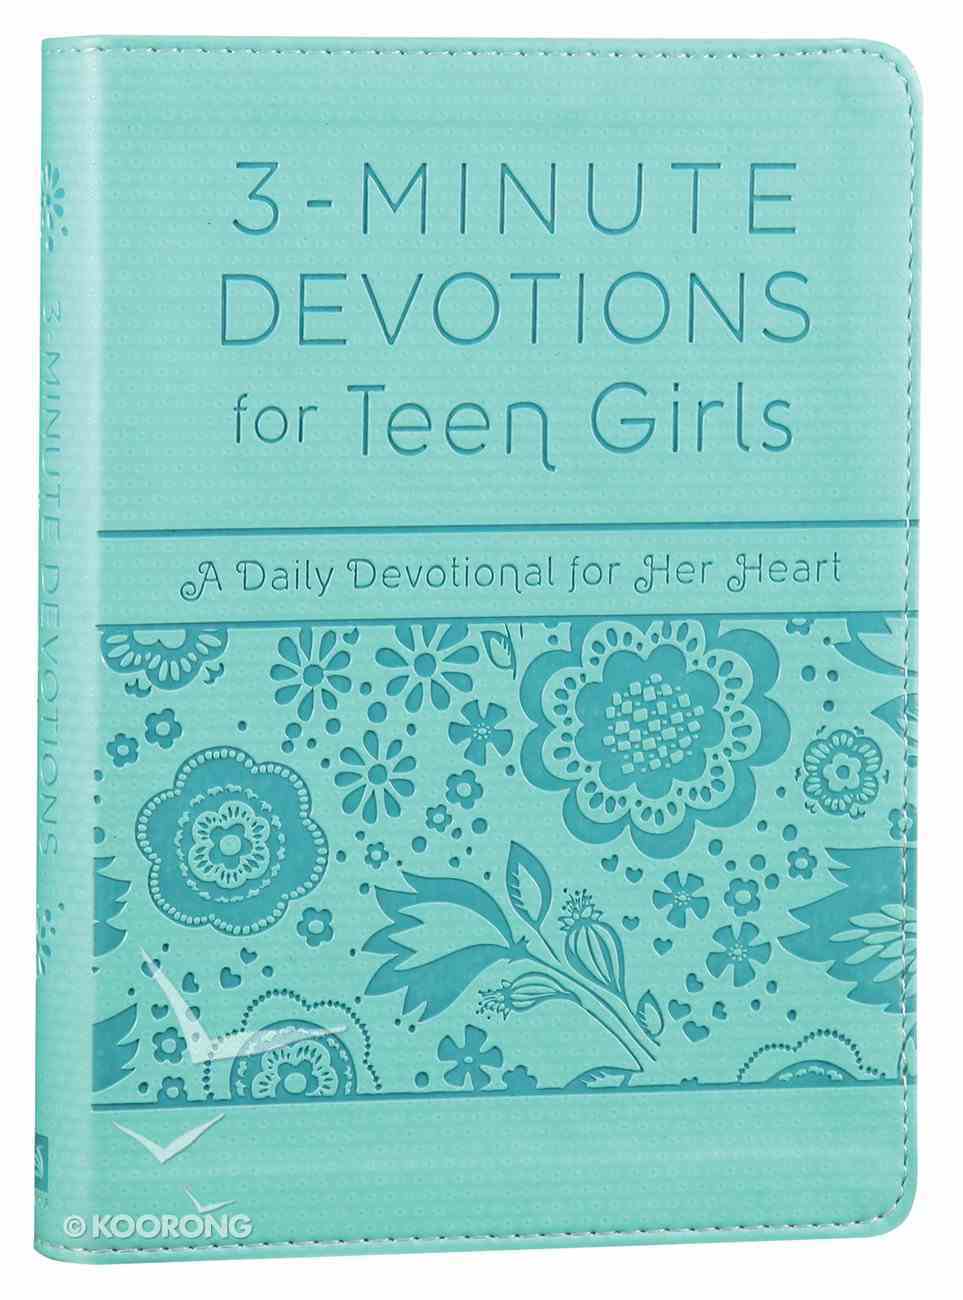 For Teen Girls - a Daily Devotional For Her Heart (3 Minute Devotions Series) Flexi Back